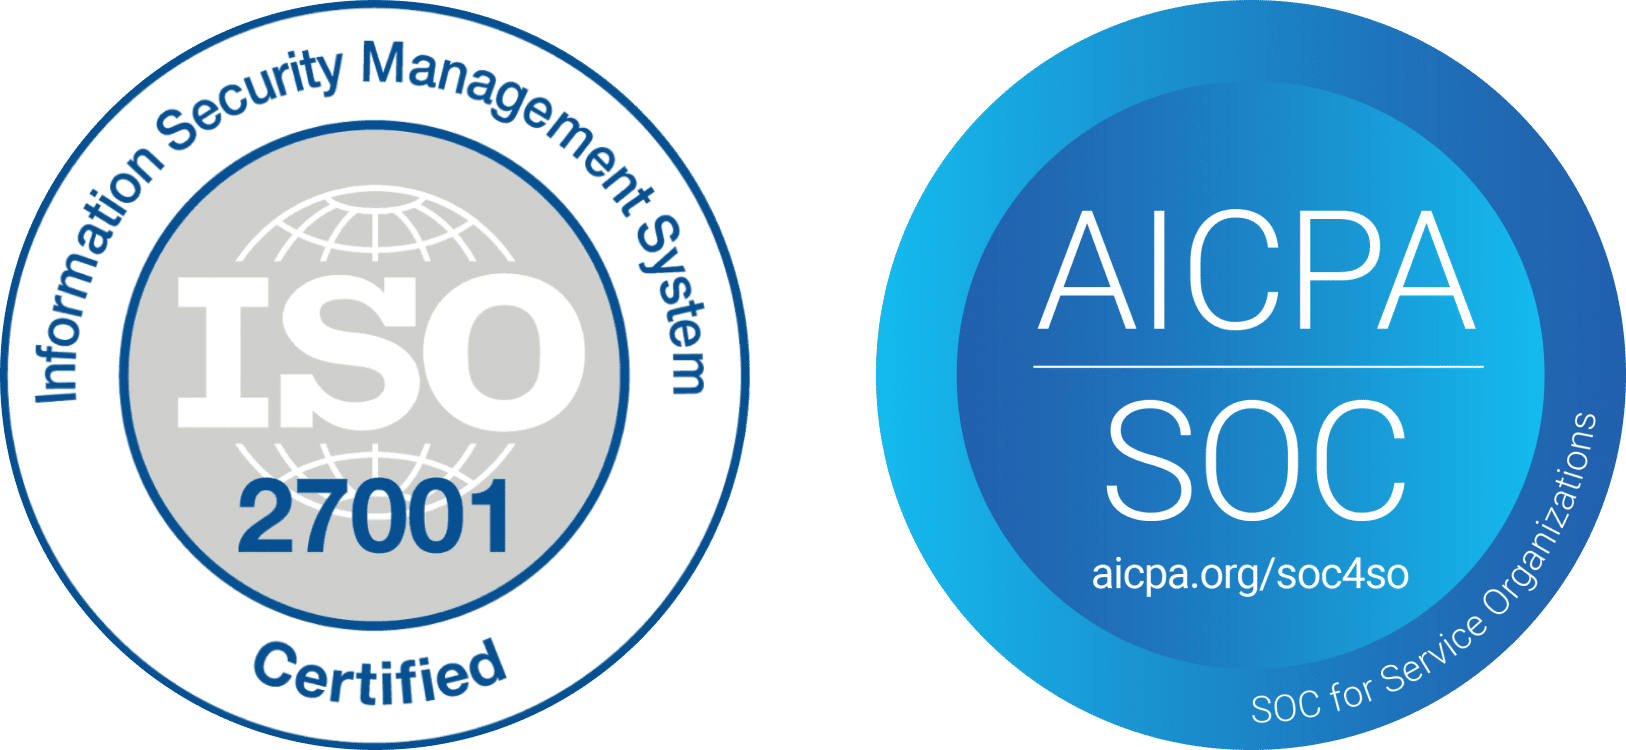 ISO-27001 and AICPA-SOC certification badges